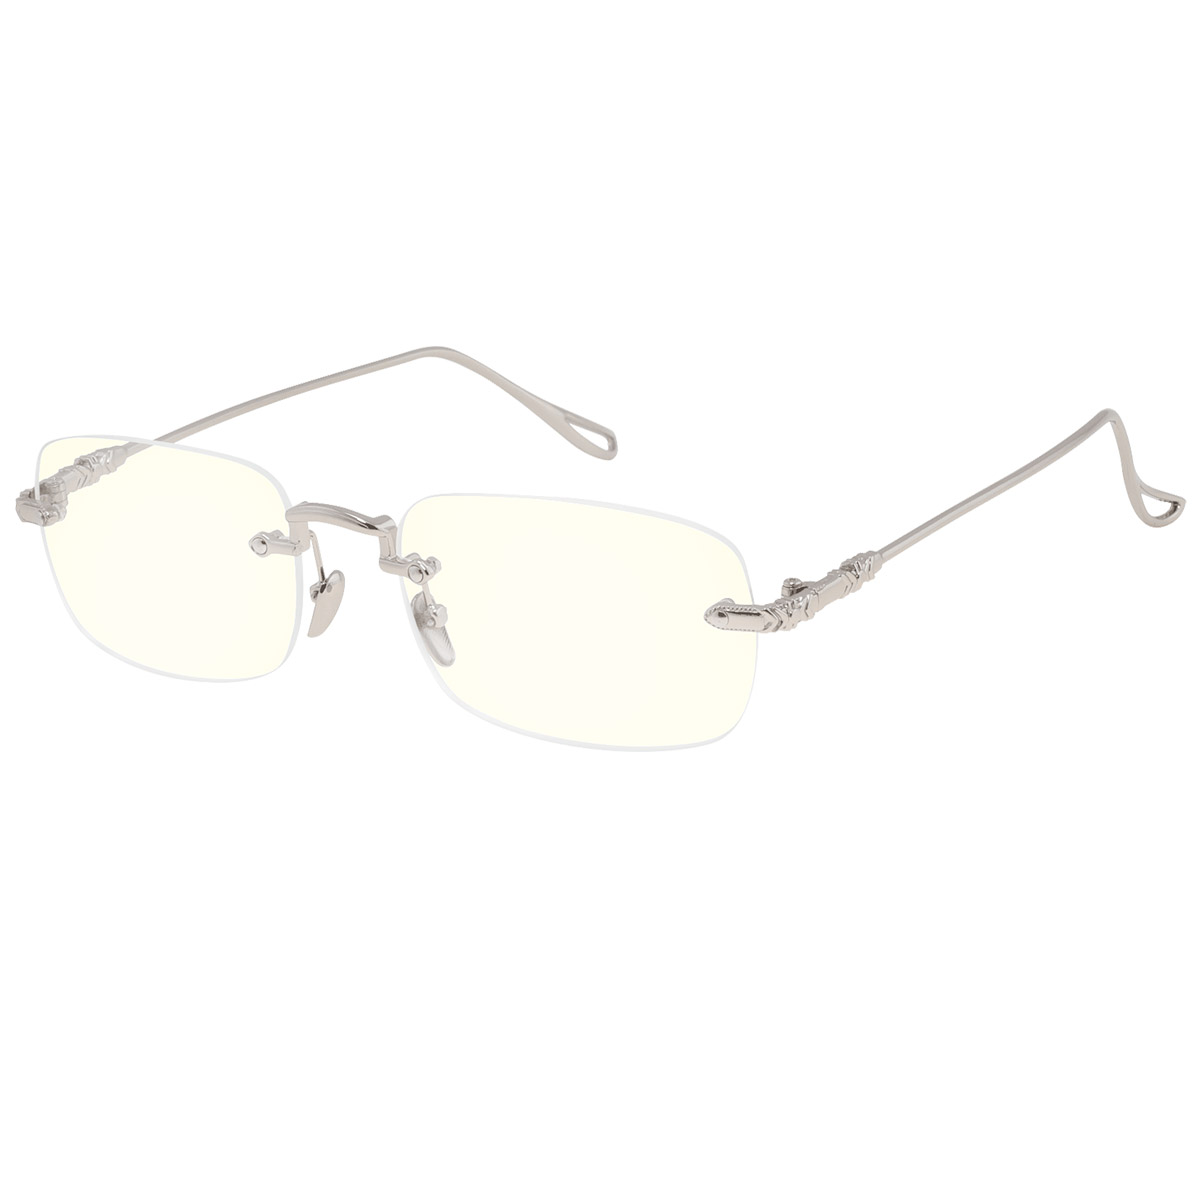 Winslow - Oval Silver Reading Glasses for Men